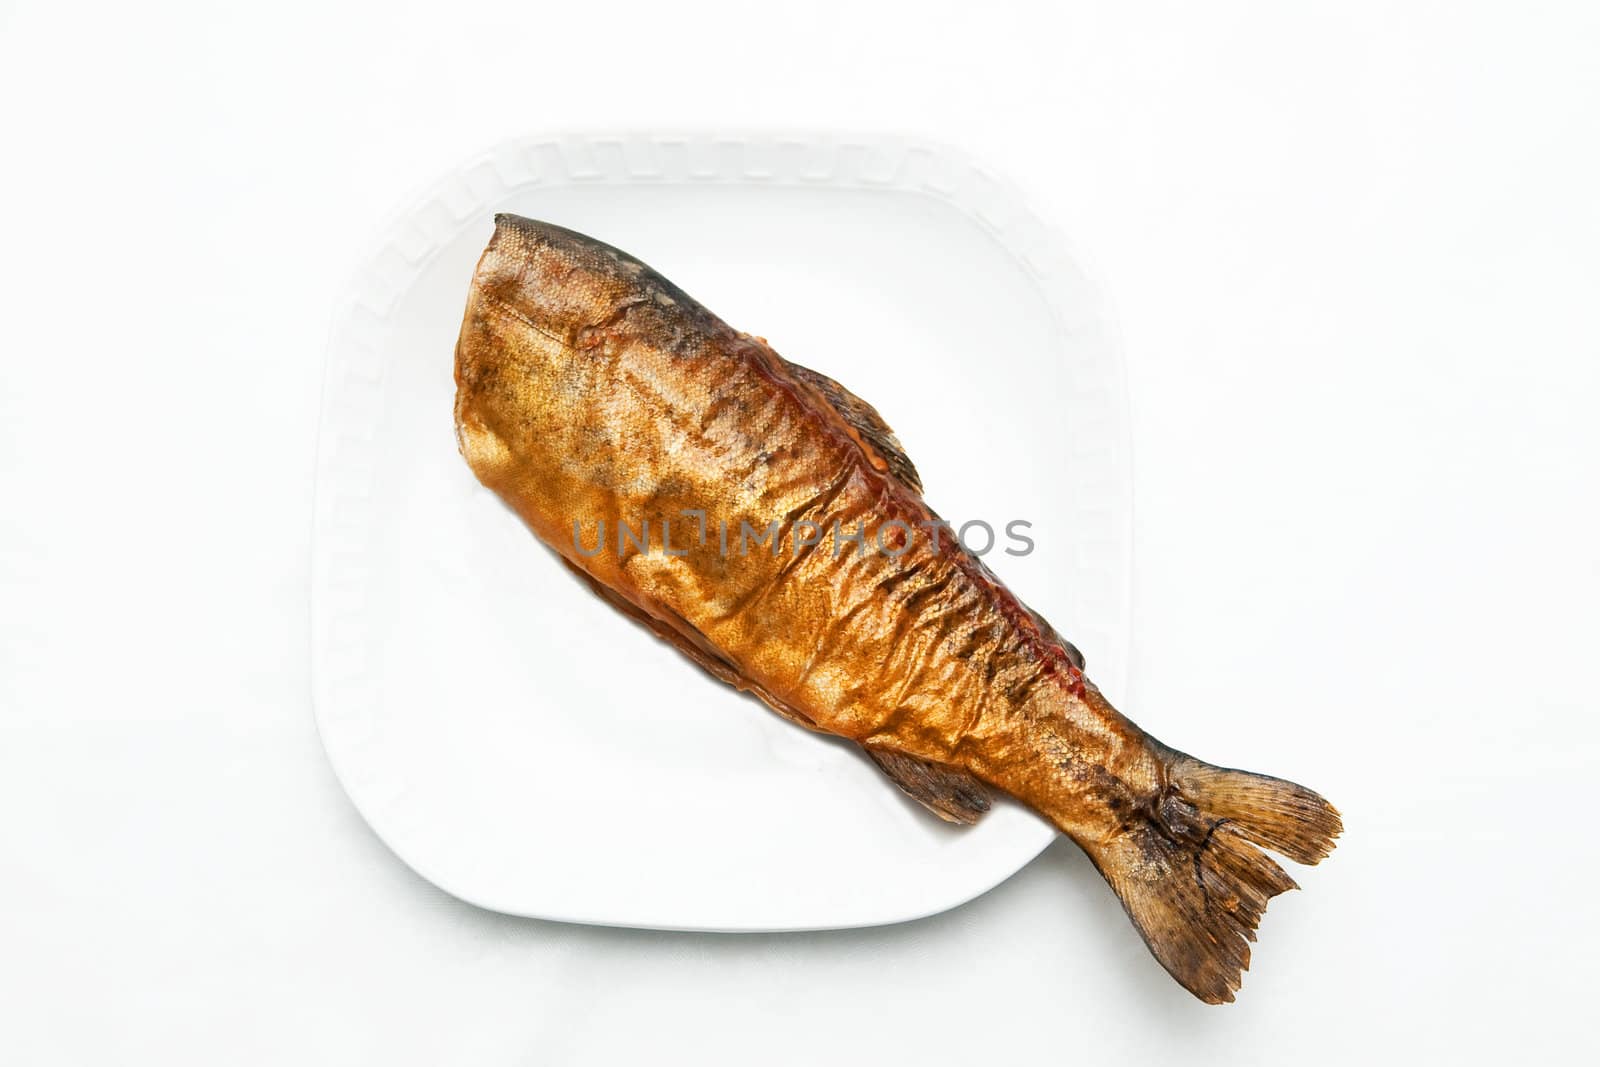 A smoked fish on the white plate